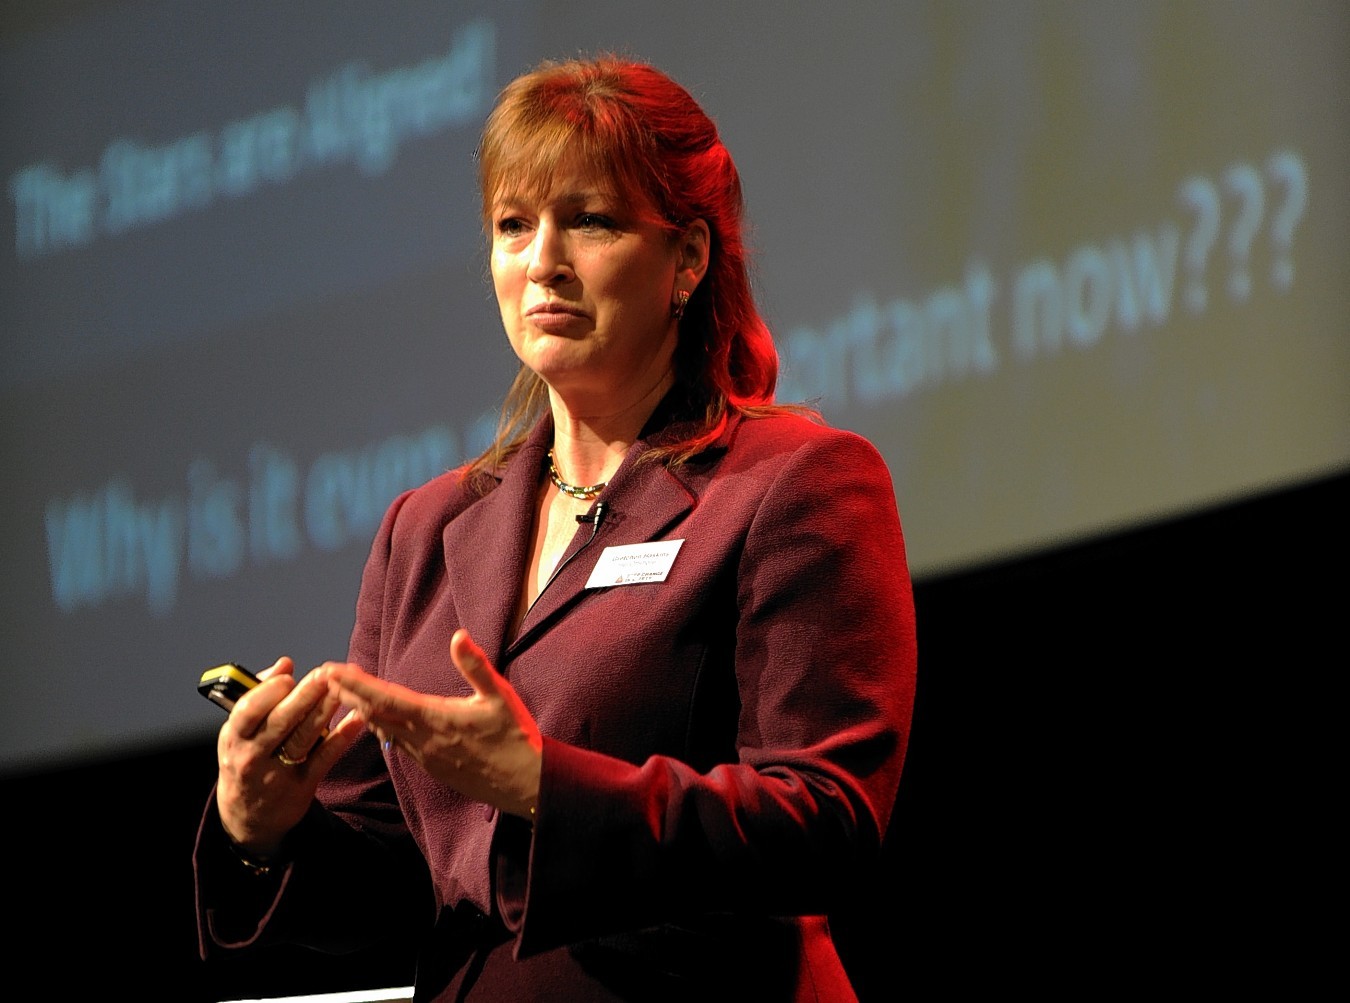 Gretchen Haskins - Chief Executive Officer, HeliOffshore.